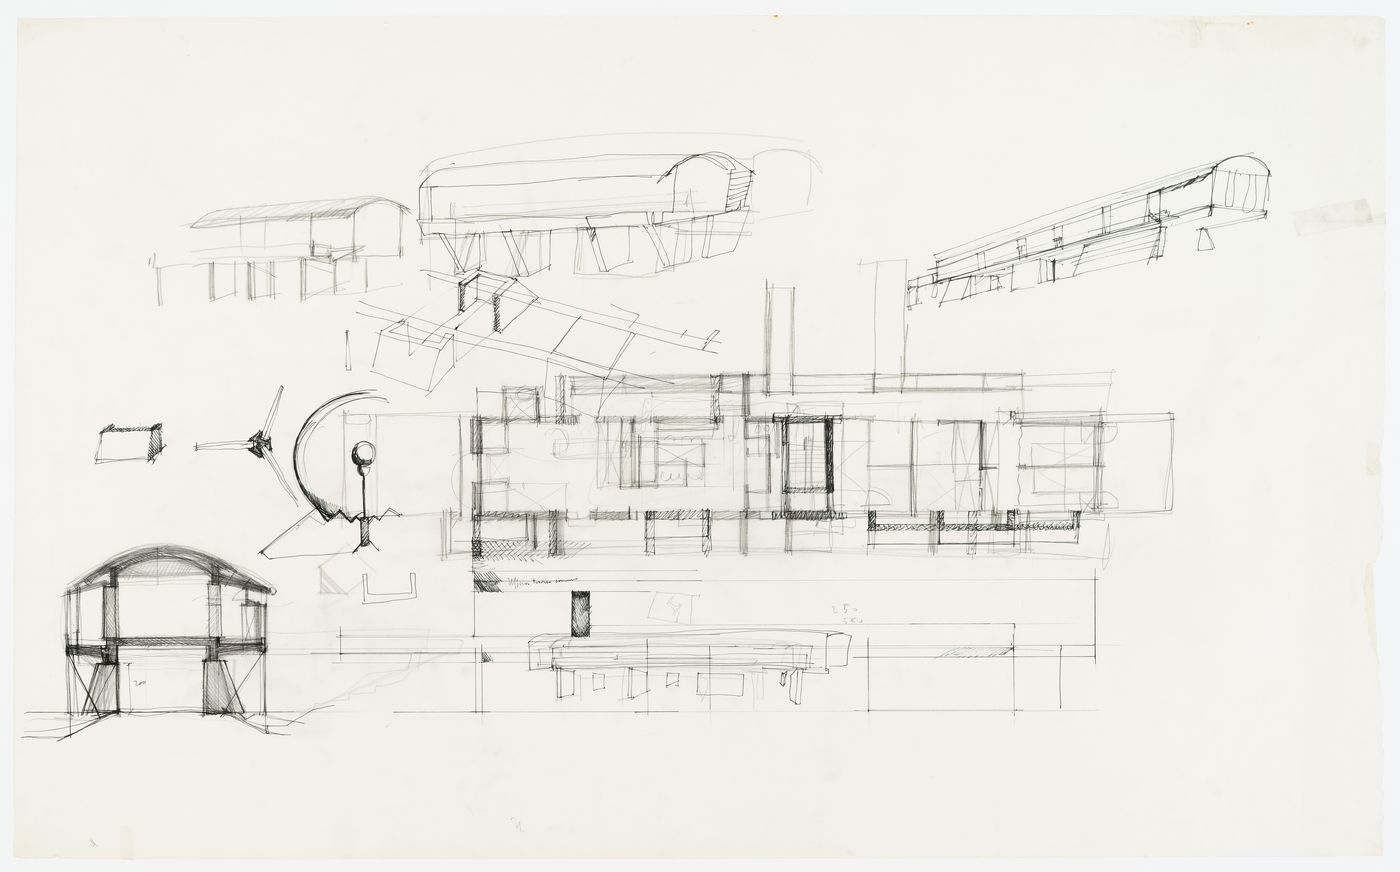 Sketches of the house, floor plan and section for Casa Ferrario, Osmate, Italy